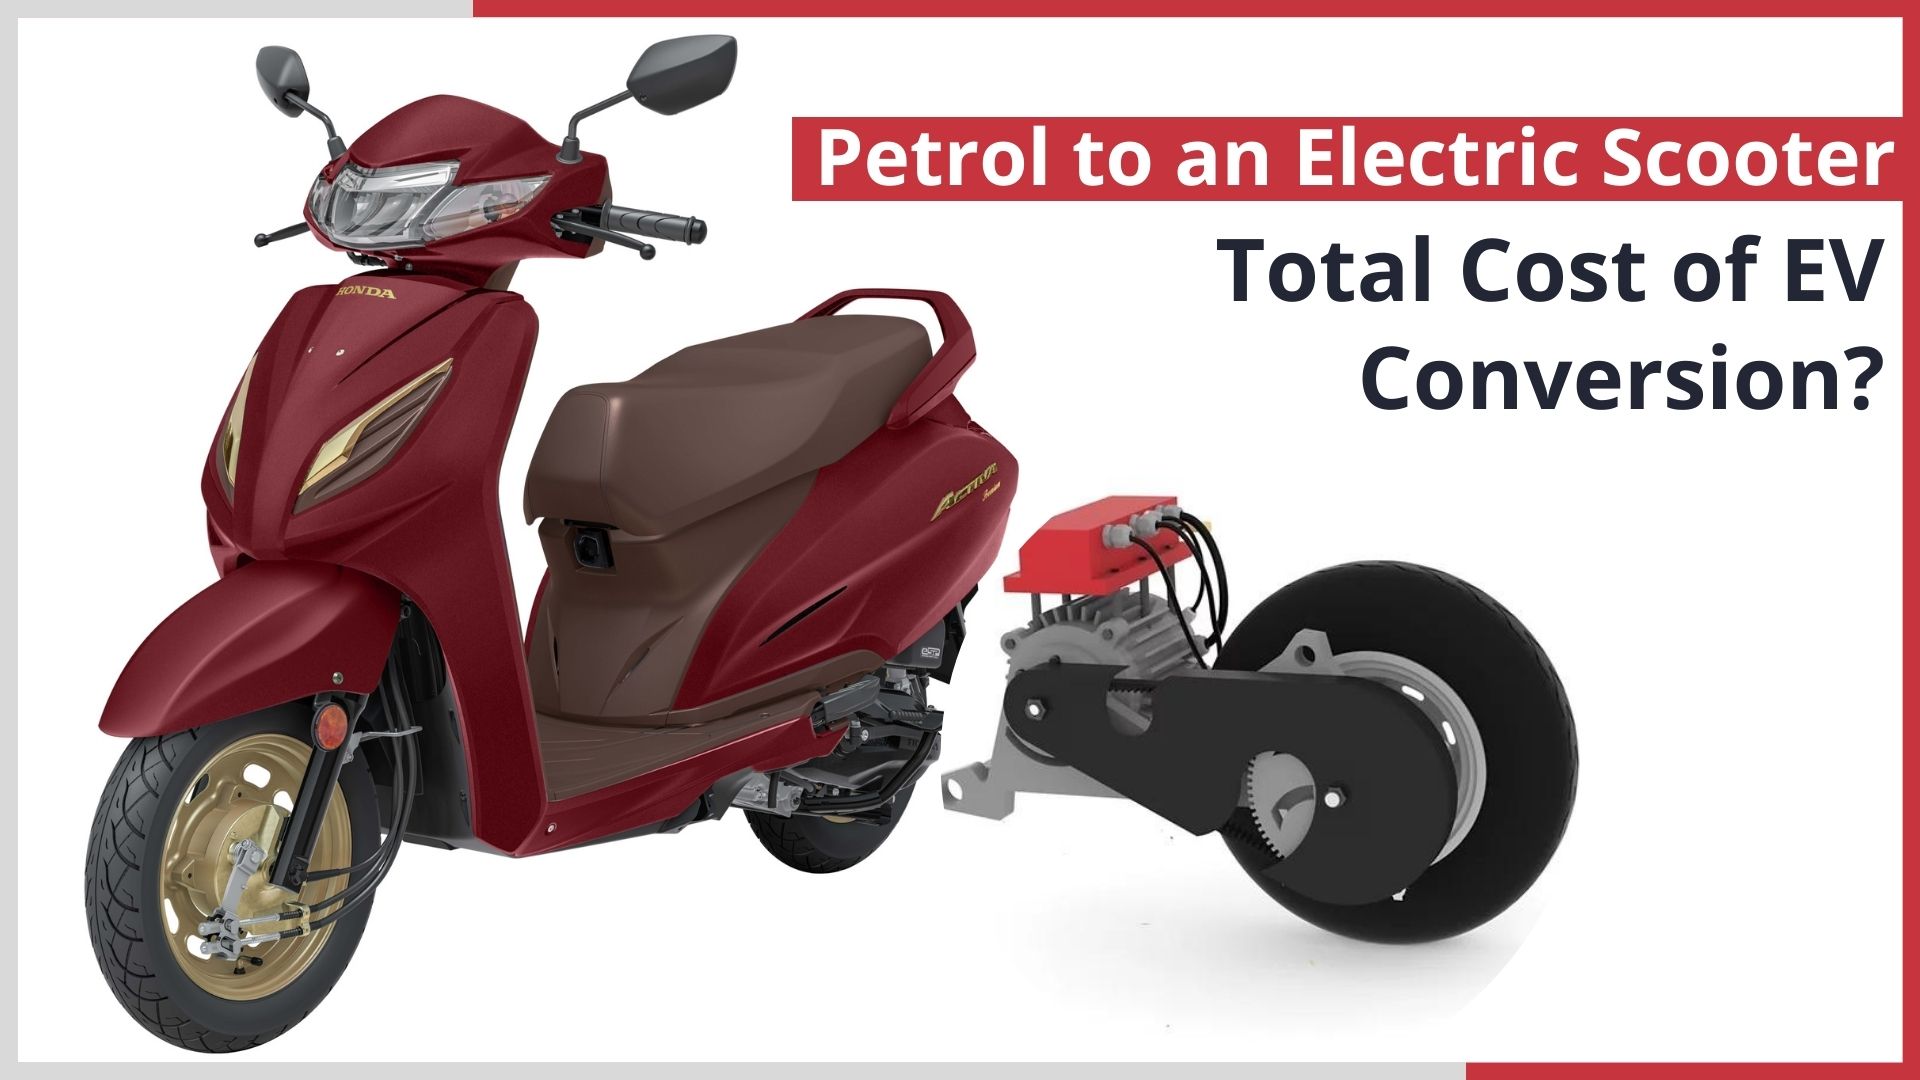 https://carandbike24.com/cost-of-ev-conversion-from-petrol-to-electric-scooter/